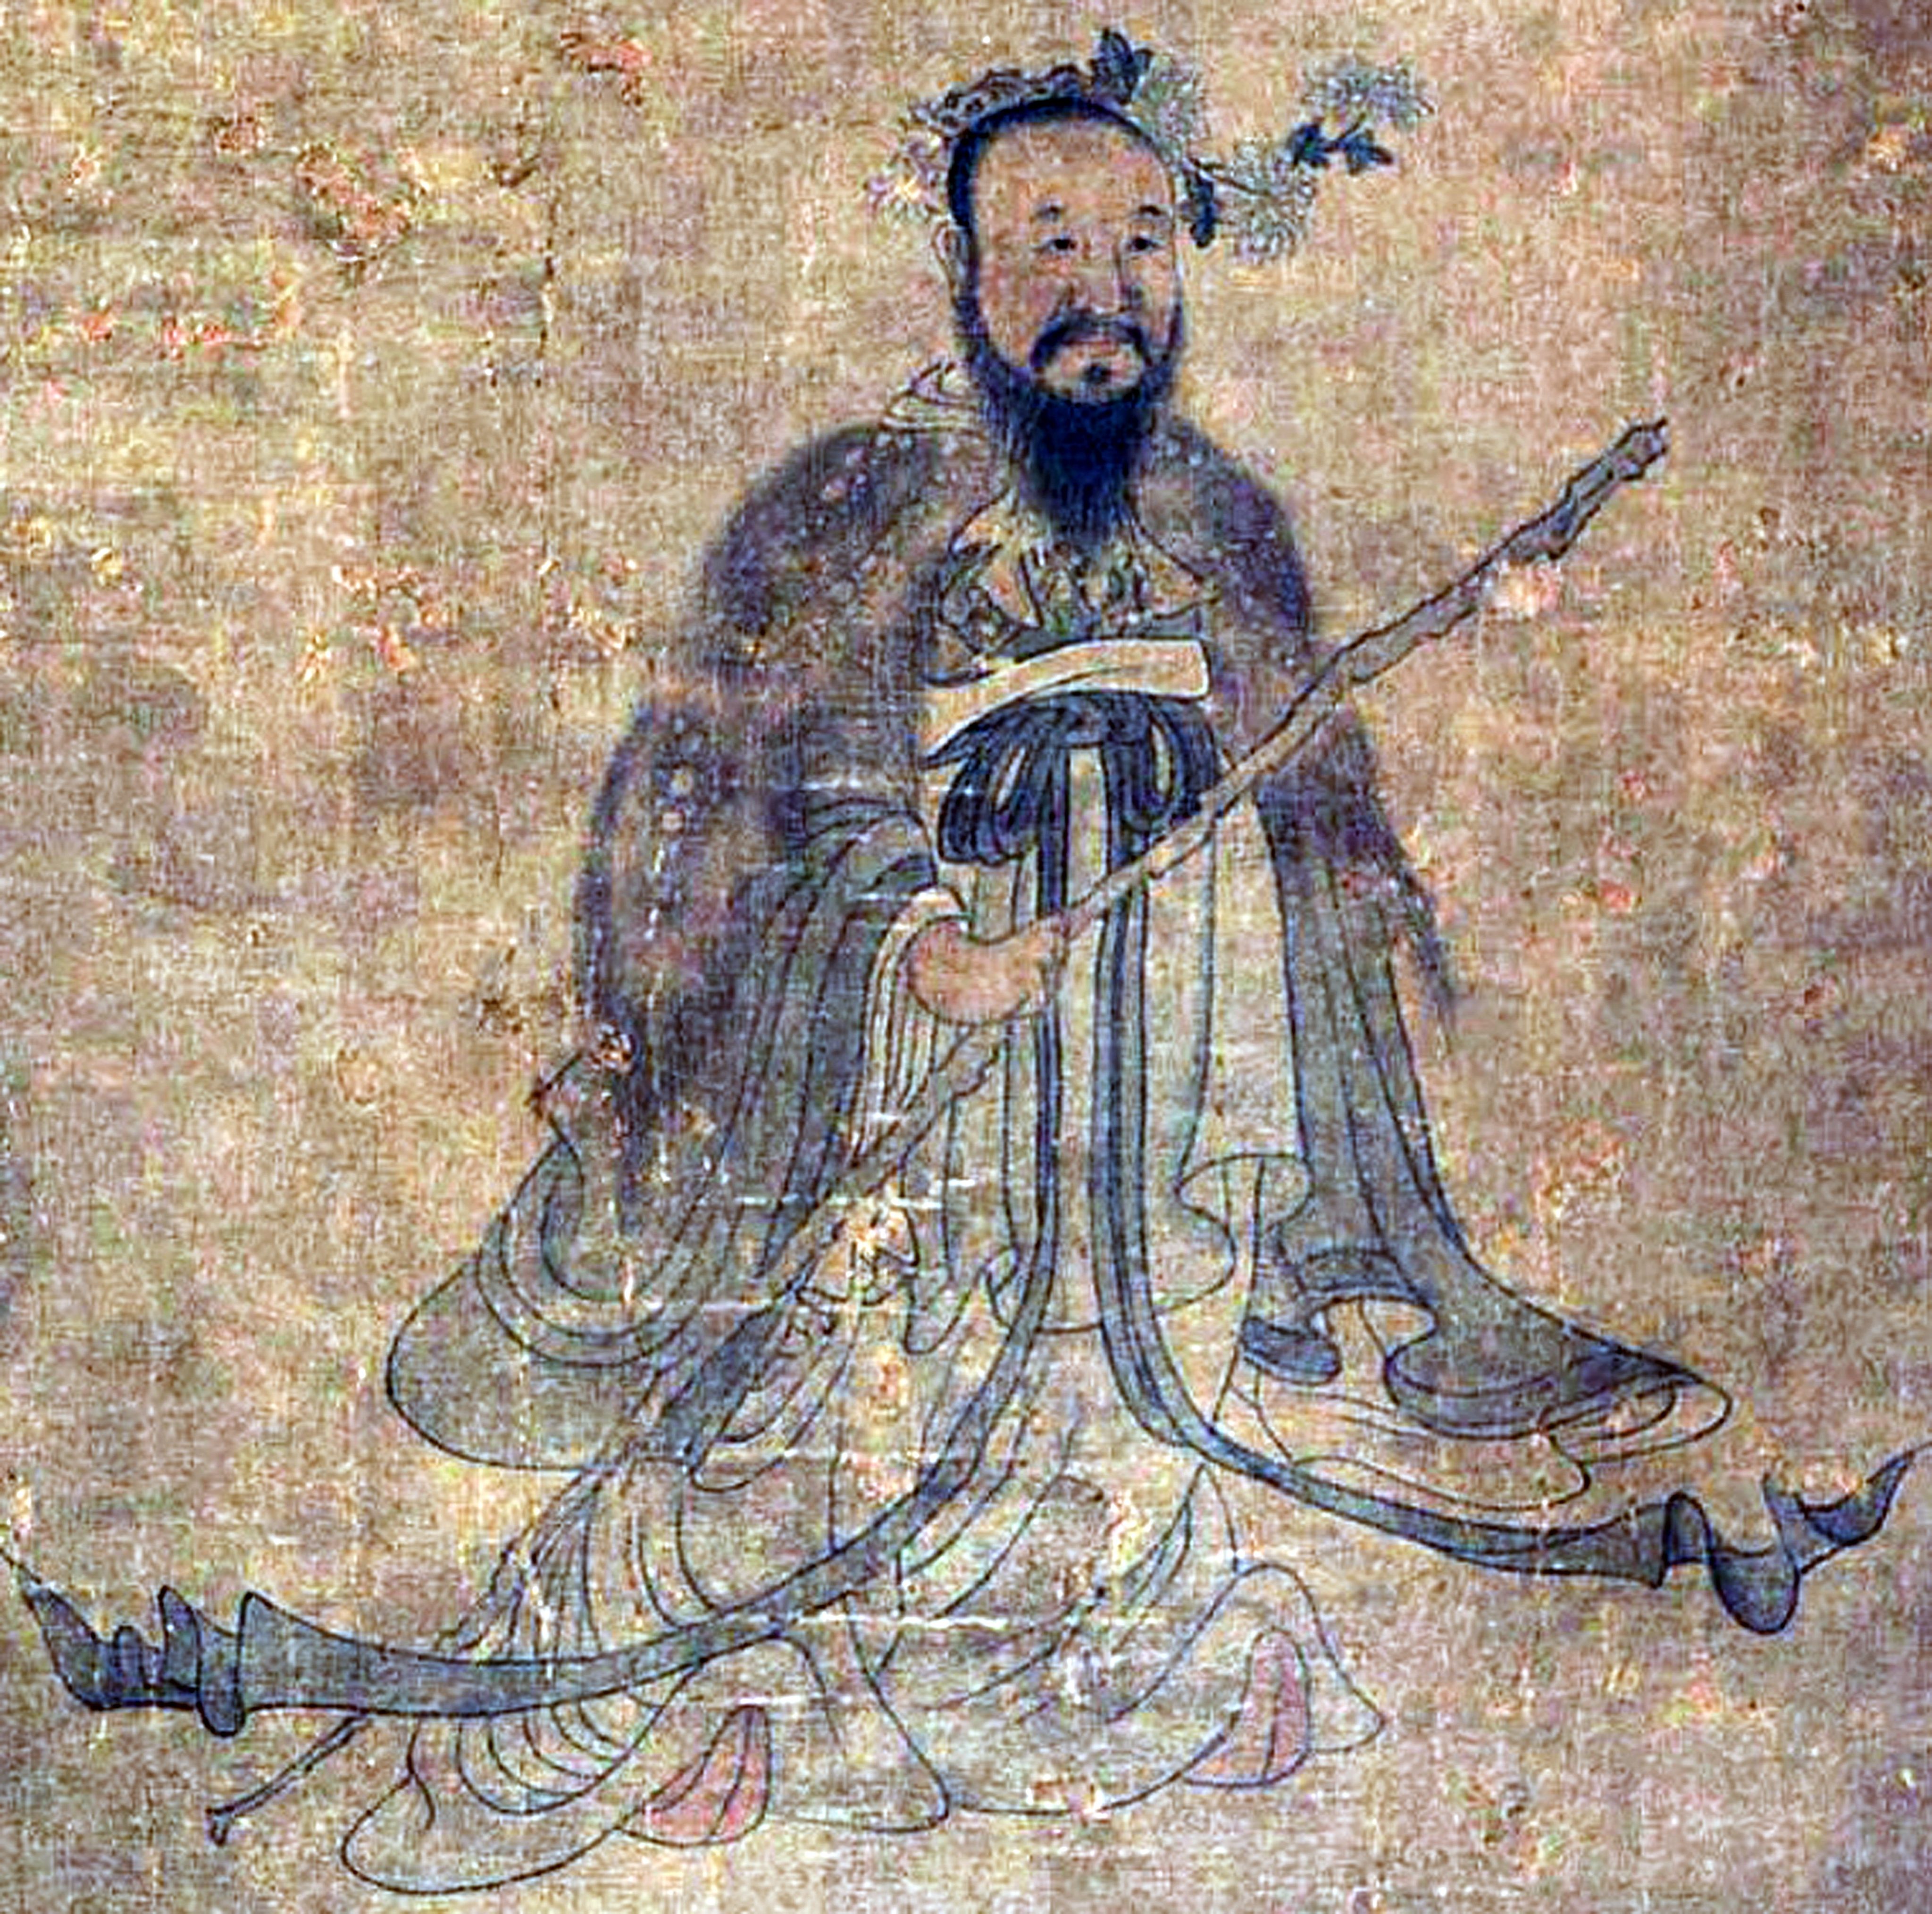 Qu Yuan was a Chinese poet who advocated resistance to the hegemonic Qin state during the Warring States Period (475BC–221BC). Photo: Getty Images